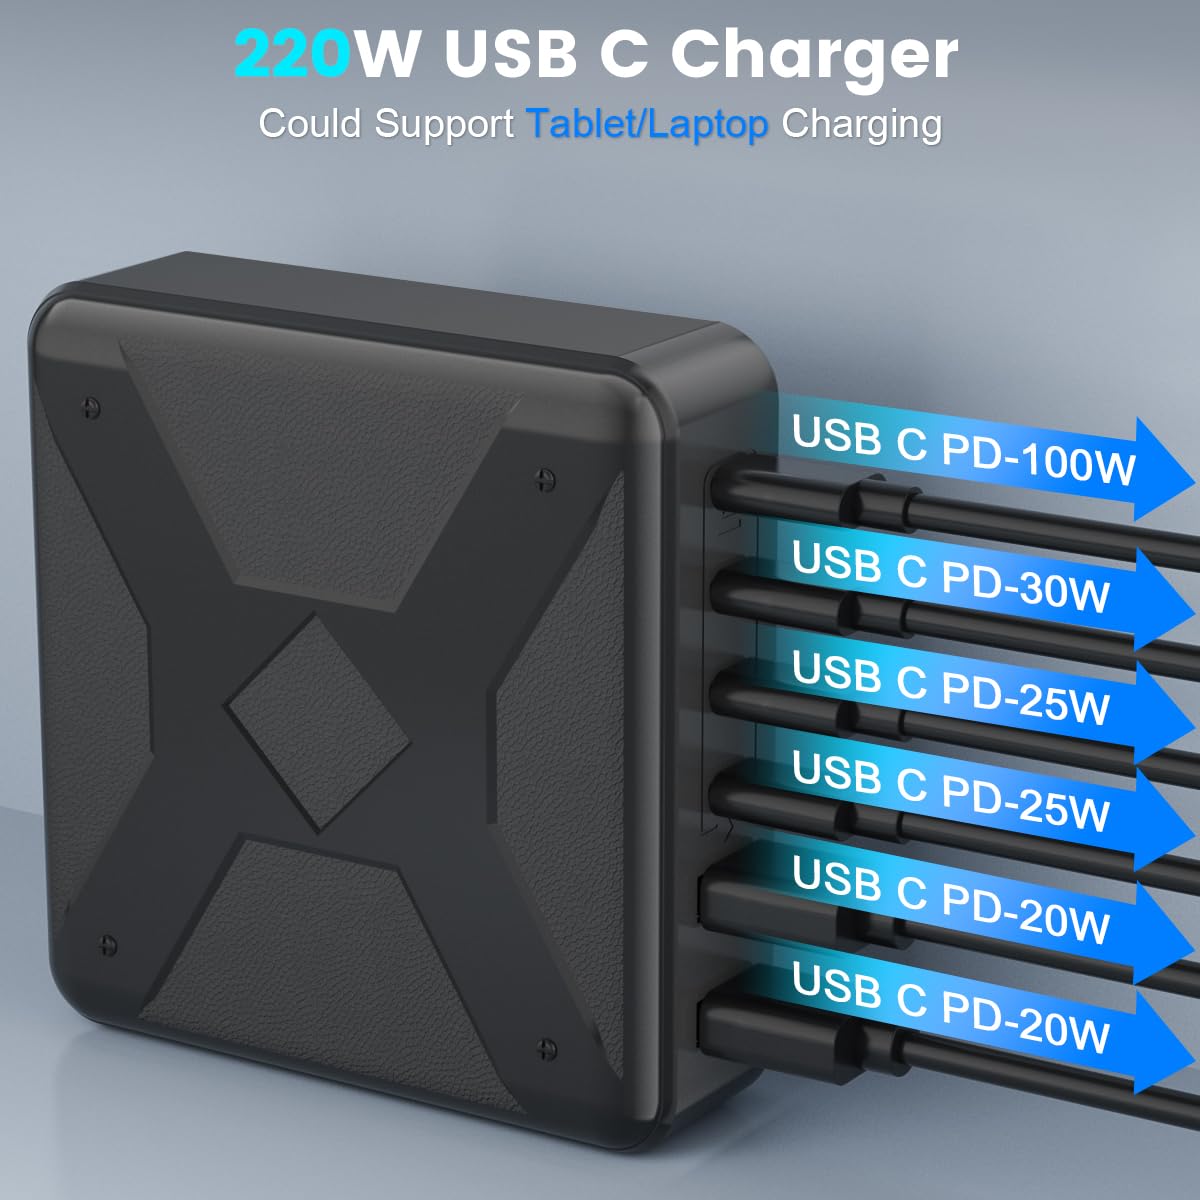 USB C Charger, 220W USB C Charging Station 6-Port Fast Charger, 100W USB C Laptop Charger USB C Charger Block for MacBook Pro/Air,iPad Series, iPhone 14/13Pro Max/12 Samsung Galaxy Note